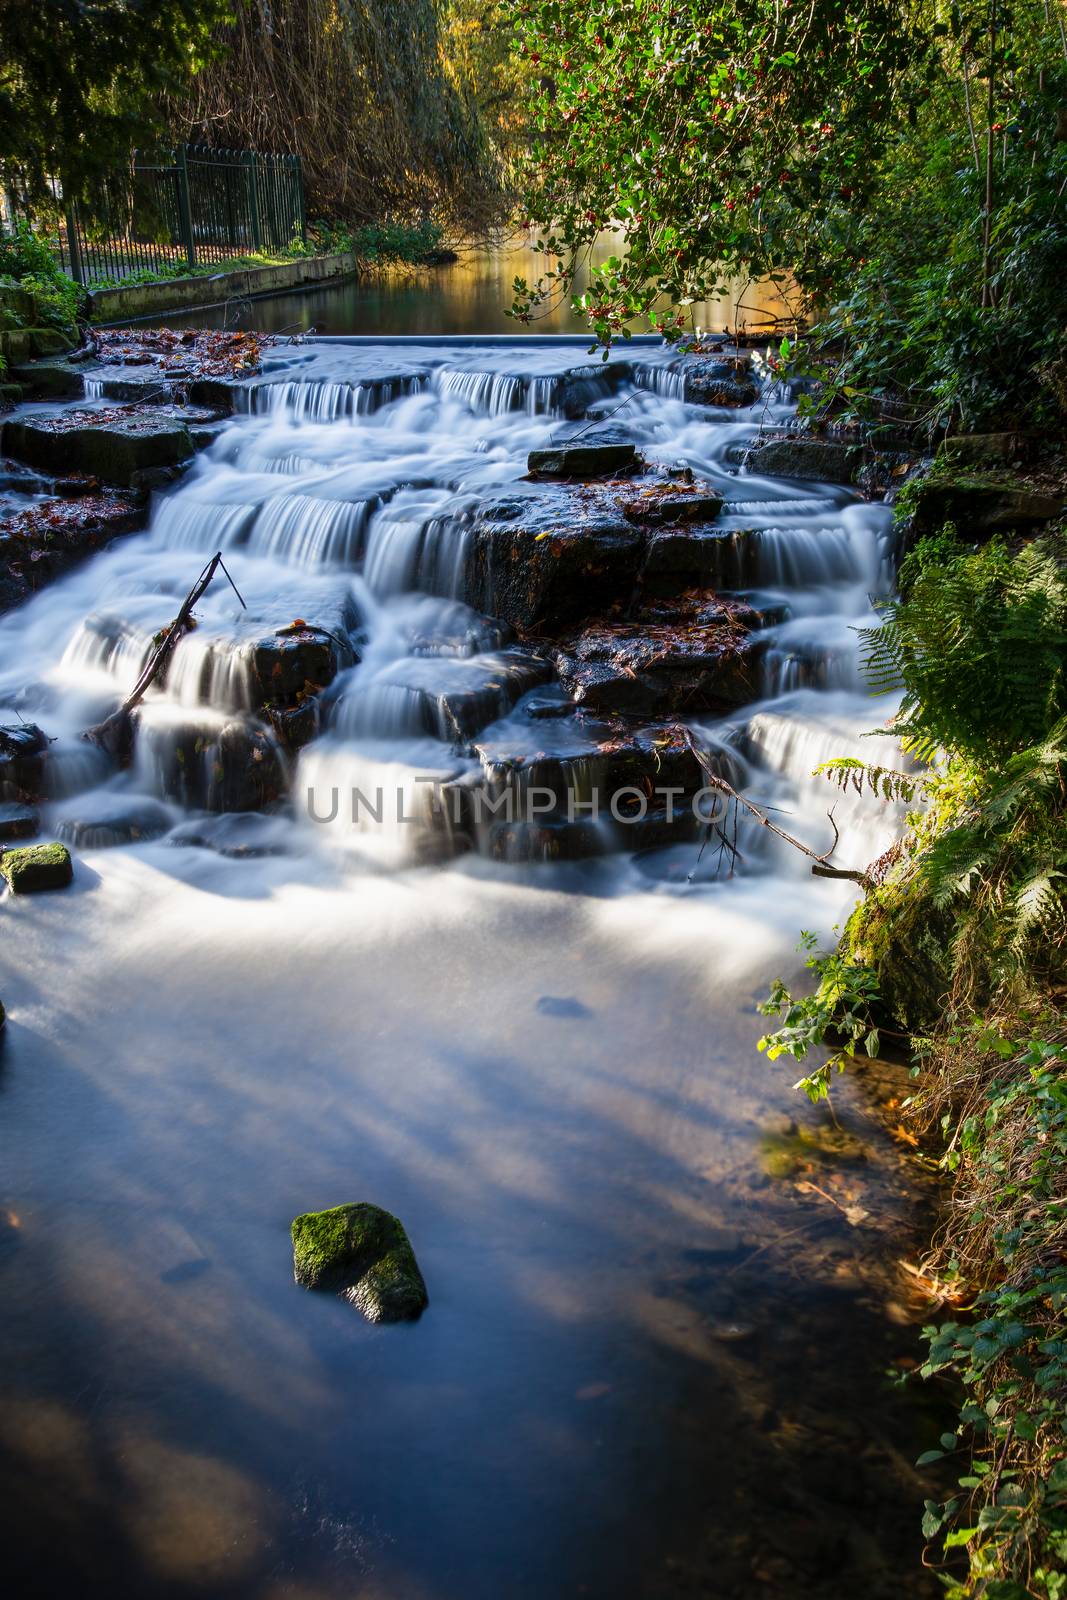 Long exposure of Carshalton Ponds Waterfall by magicbones